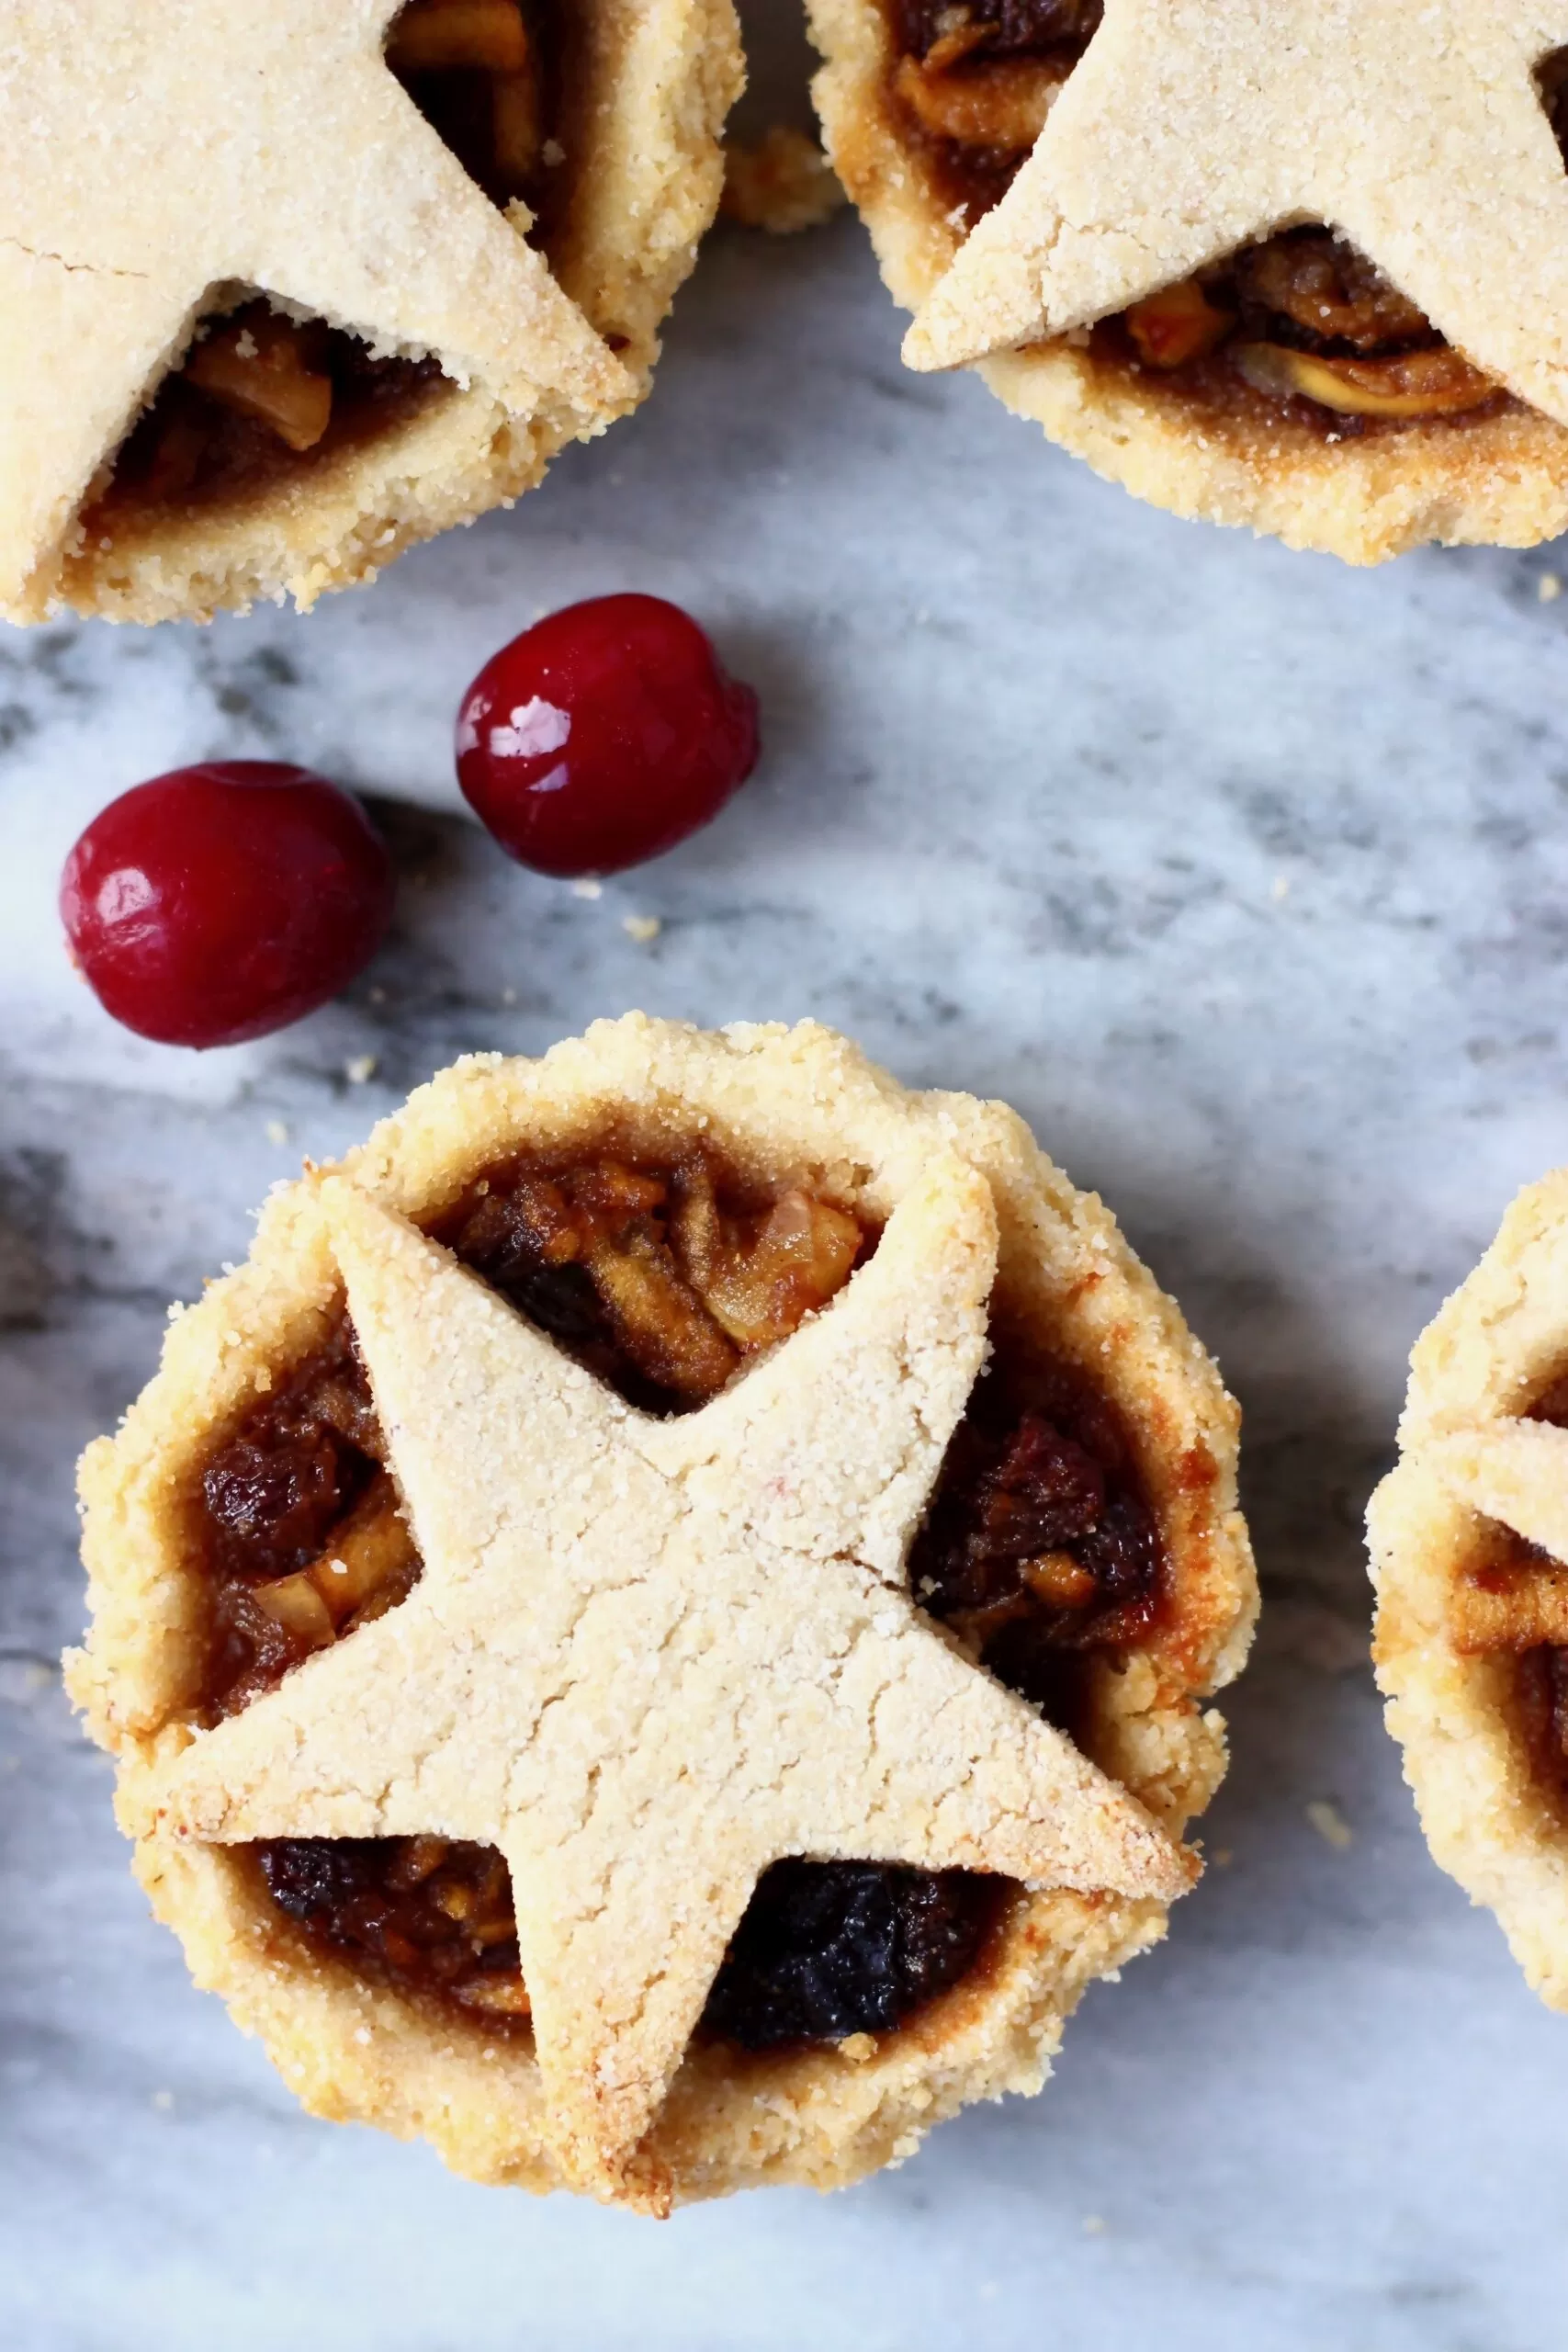 Three gluten-free vegan mince pies topped with pastry stars